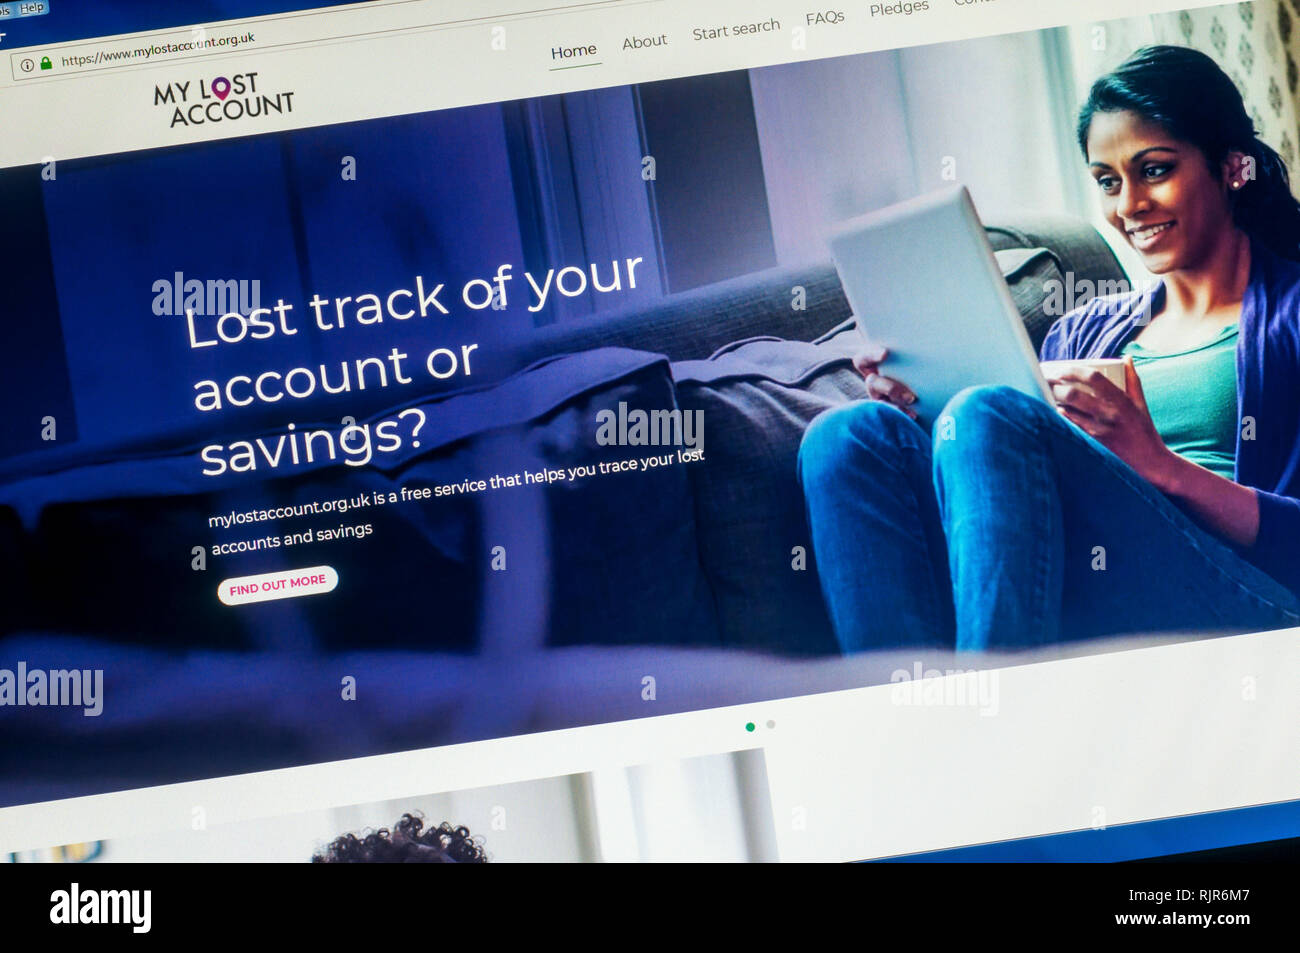 Home page of the website of My Lost Account, a free service to help trace lost bank accounts and savings. Stock Photo